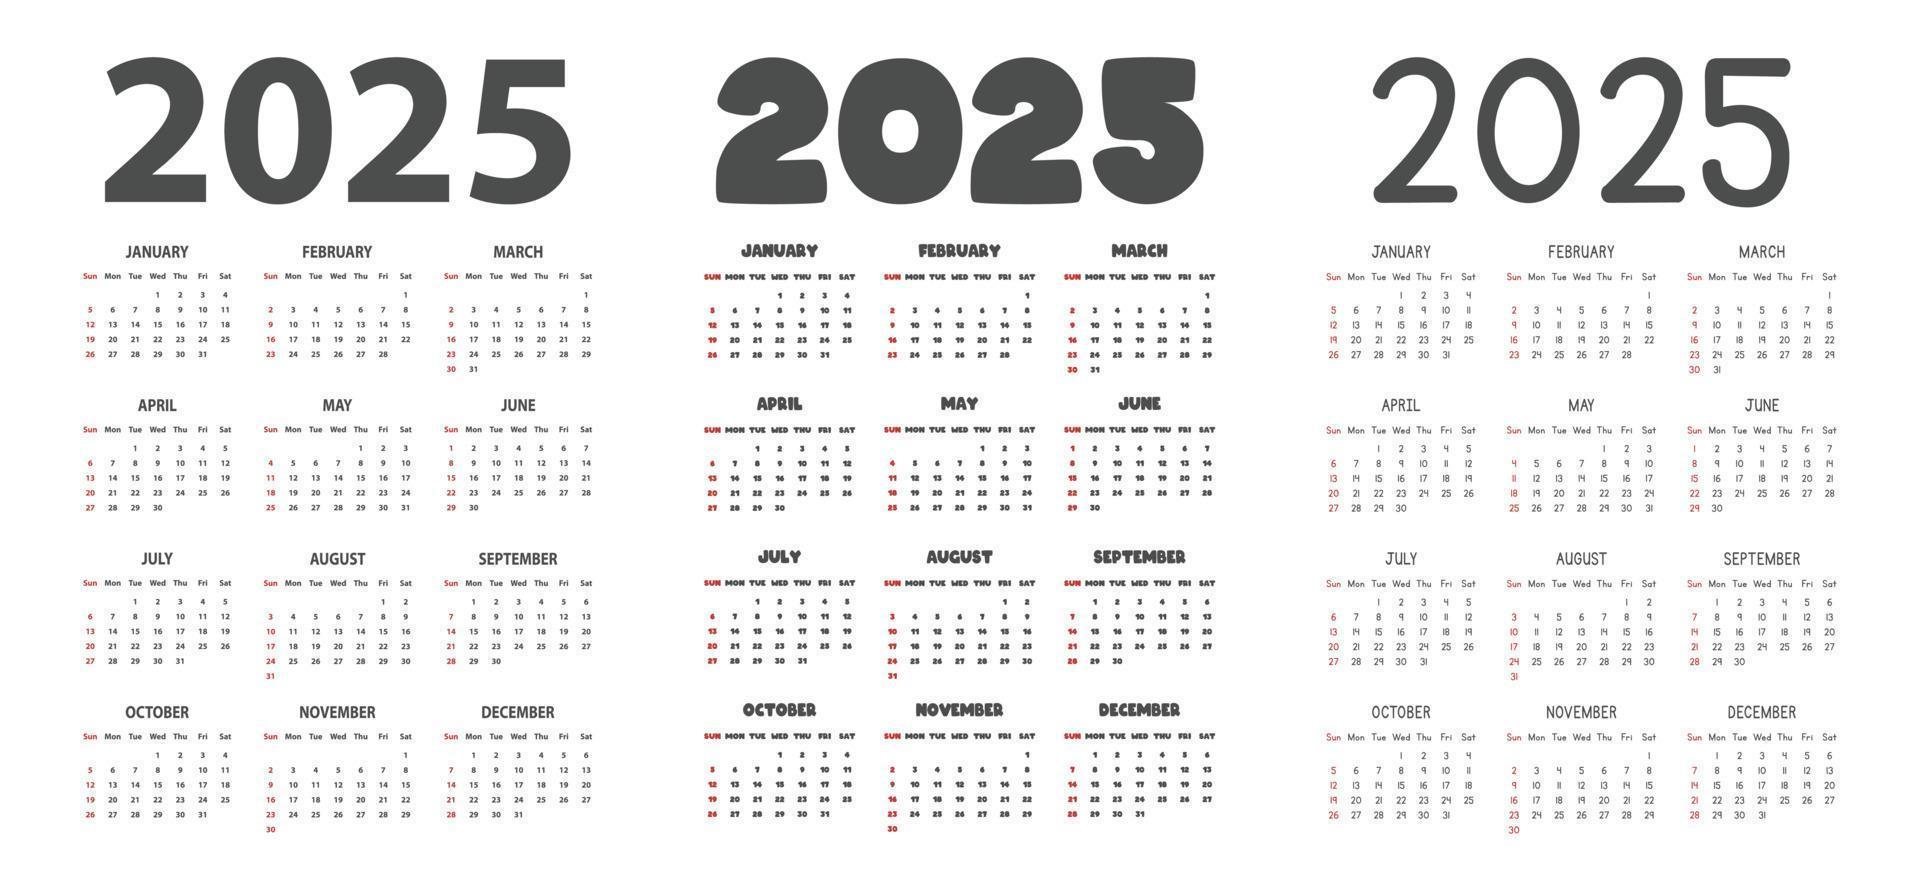 2025 calendar in different fonts style vector illustration. Simple classic monthly calendar for 2025 in sans, bold, cartoon font. The week starts Sunday. Minimalist calendar planner year 2025 template